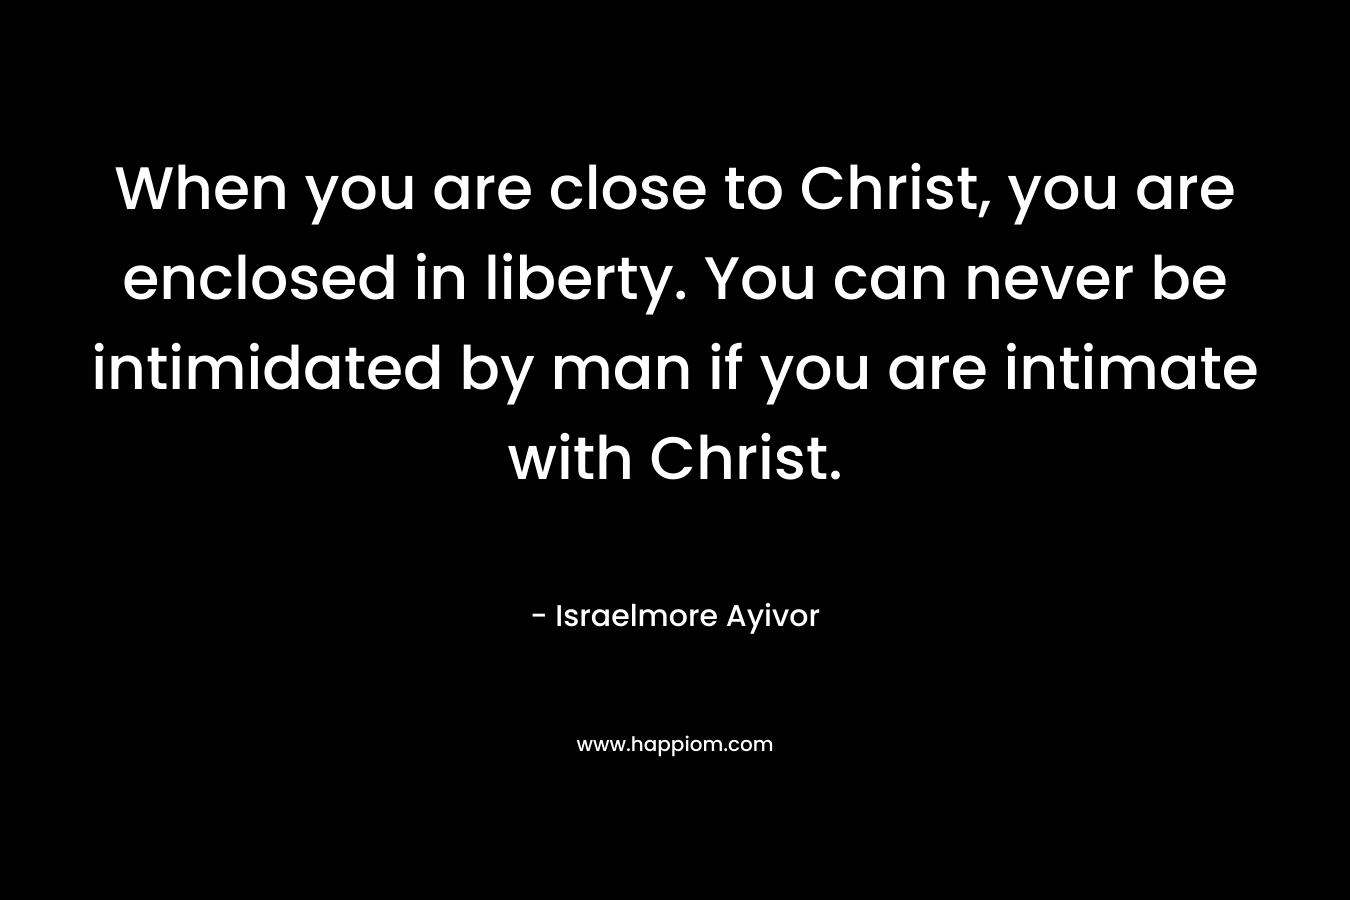 When you are close to Christ, you are enclosed in liberty. You can never be intimidated by man if you are intimate with Christ.